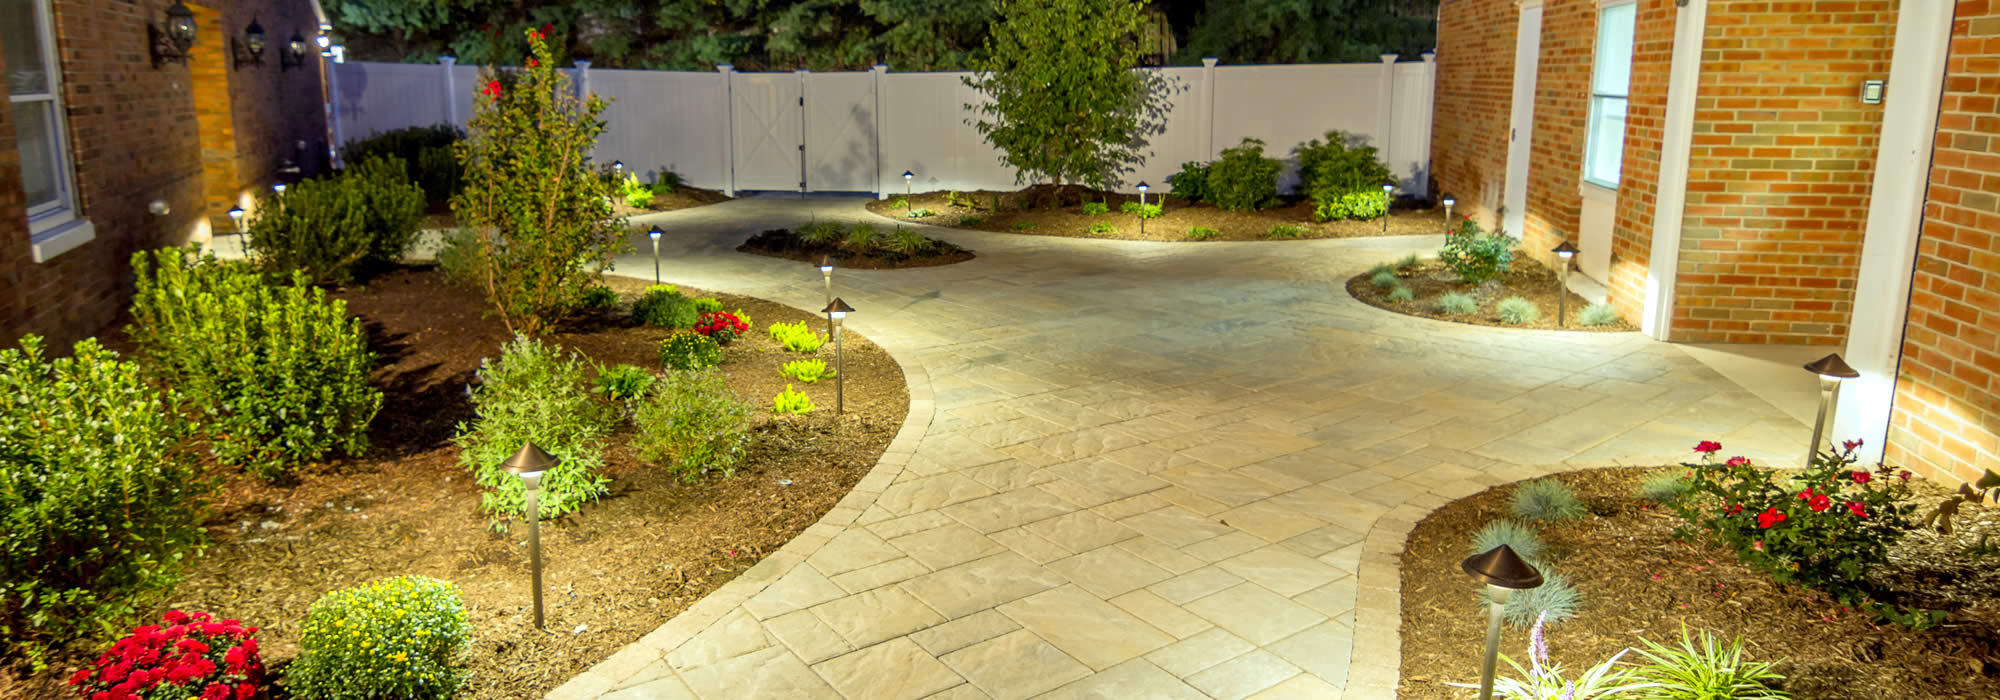 Landscaping Services in Maple Bluff